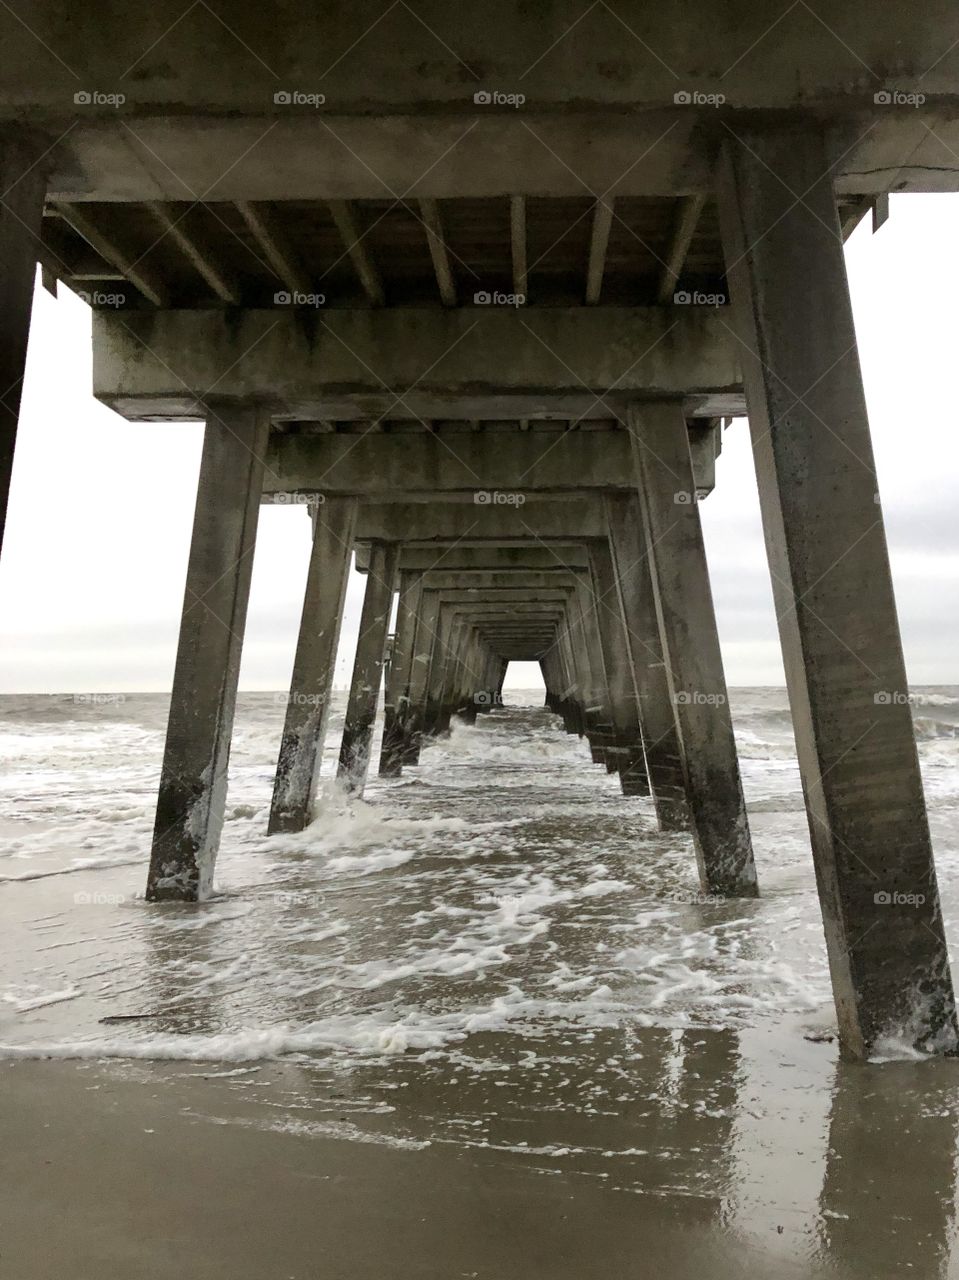 Under the Tybee Island Pier, I gaze at the reflections swirling with the cold salt water waves as scouring sand scrapes my skin. 